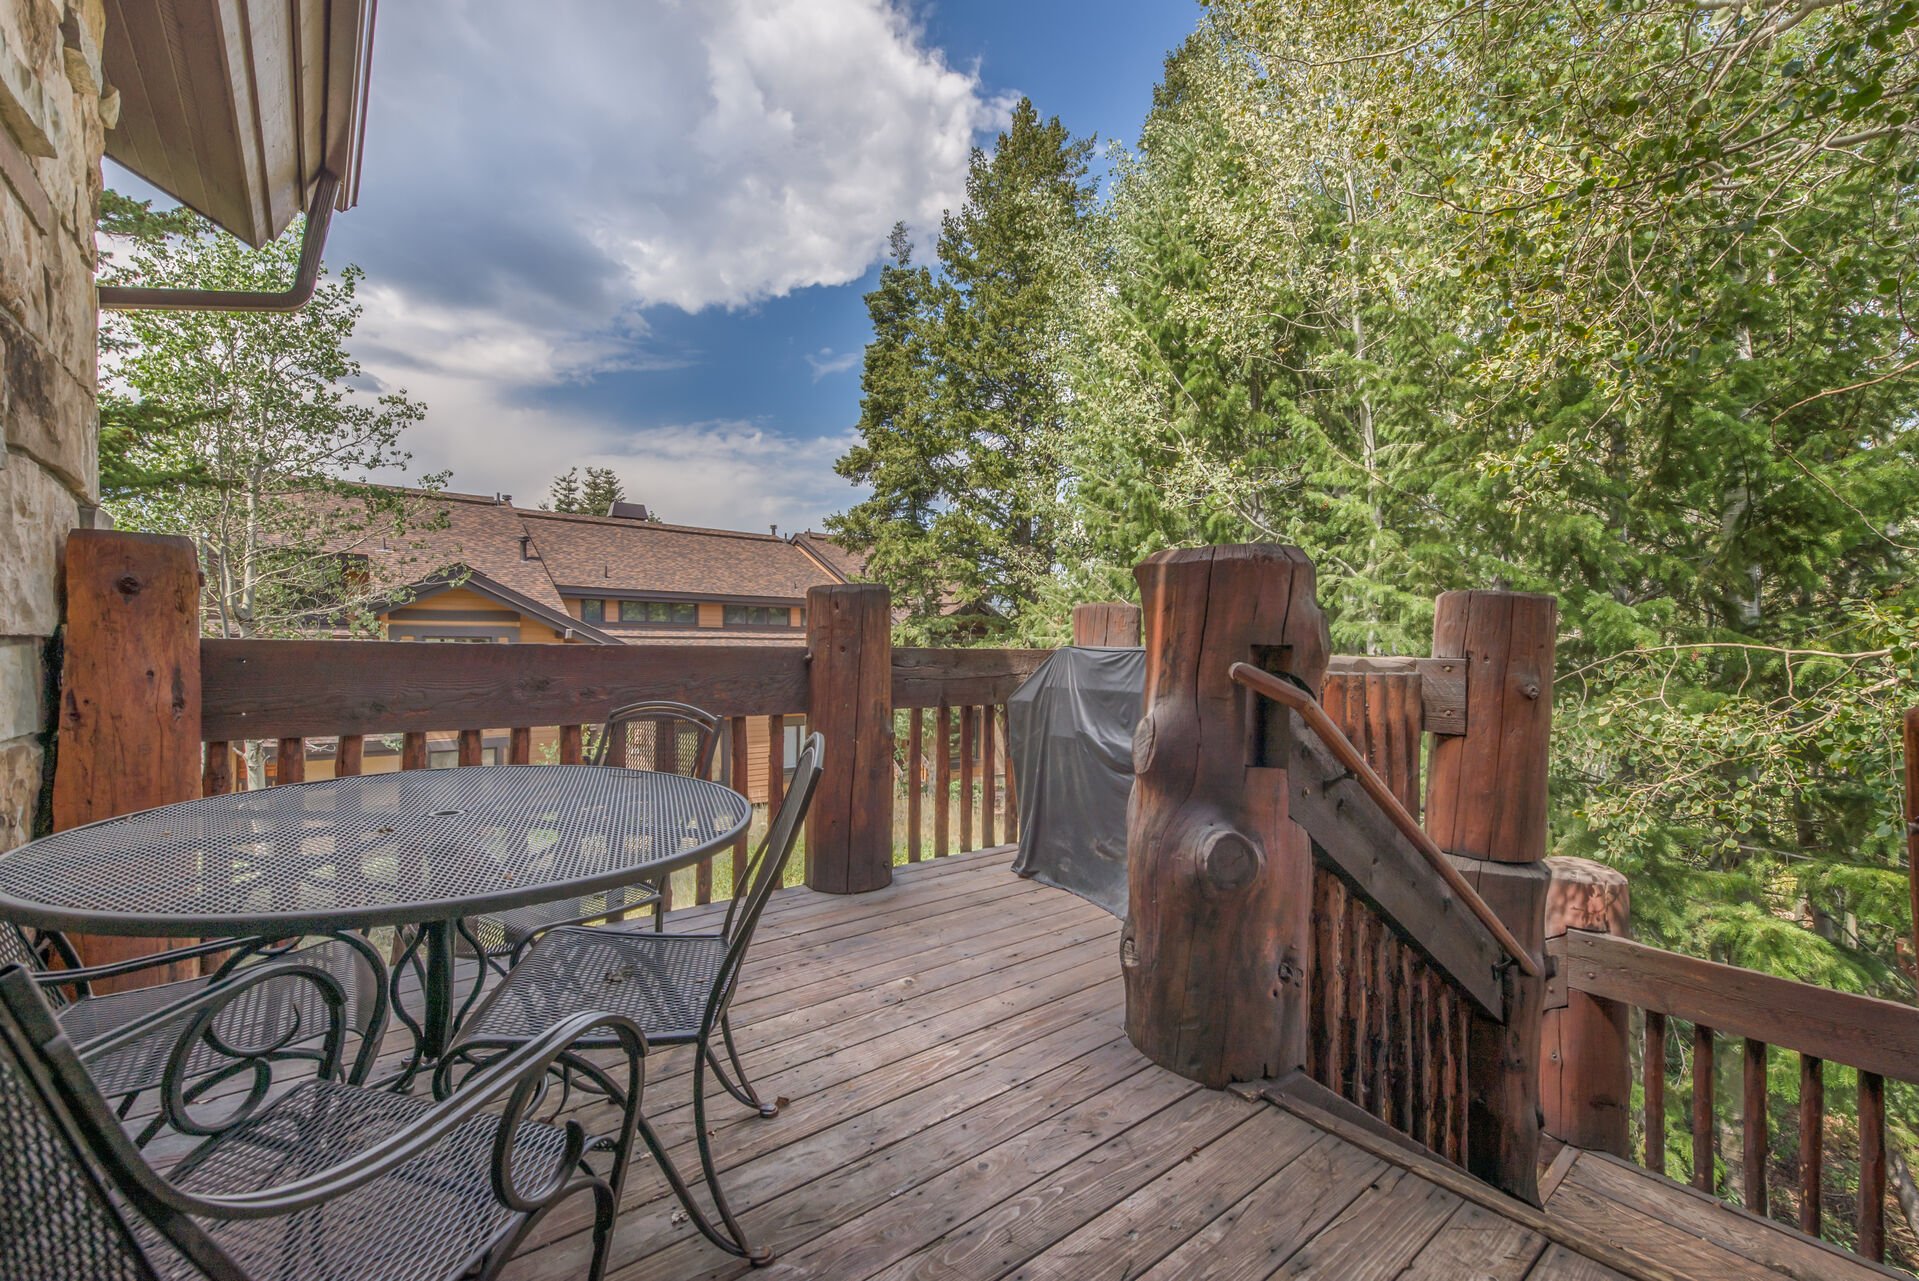 Upper Level Deck with BBQ Grill and Patio Seating - Stairs to Lower Level Deck with Private Hot Tub